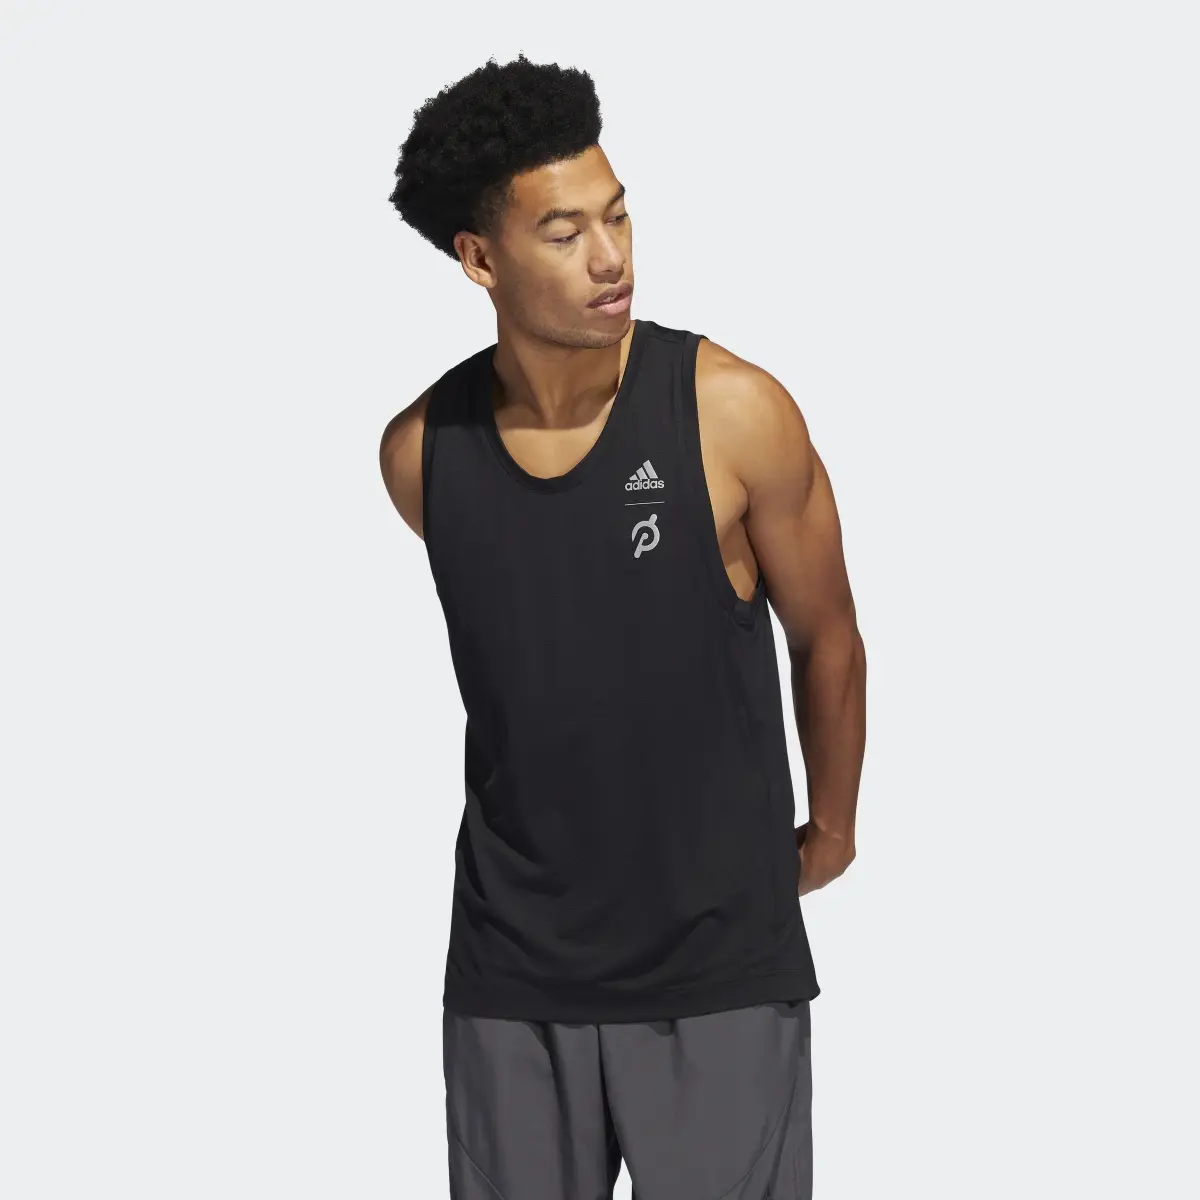 Adidas Capable of Greatness Training Tank Top. 2